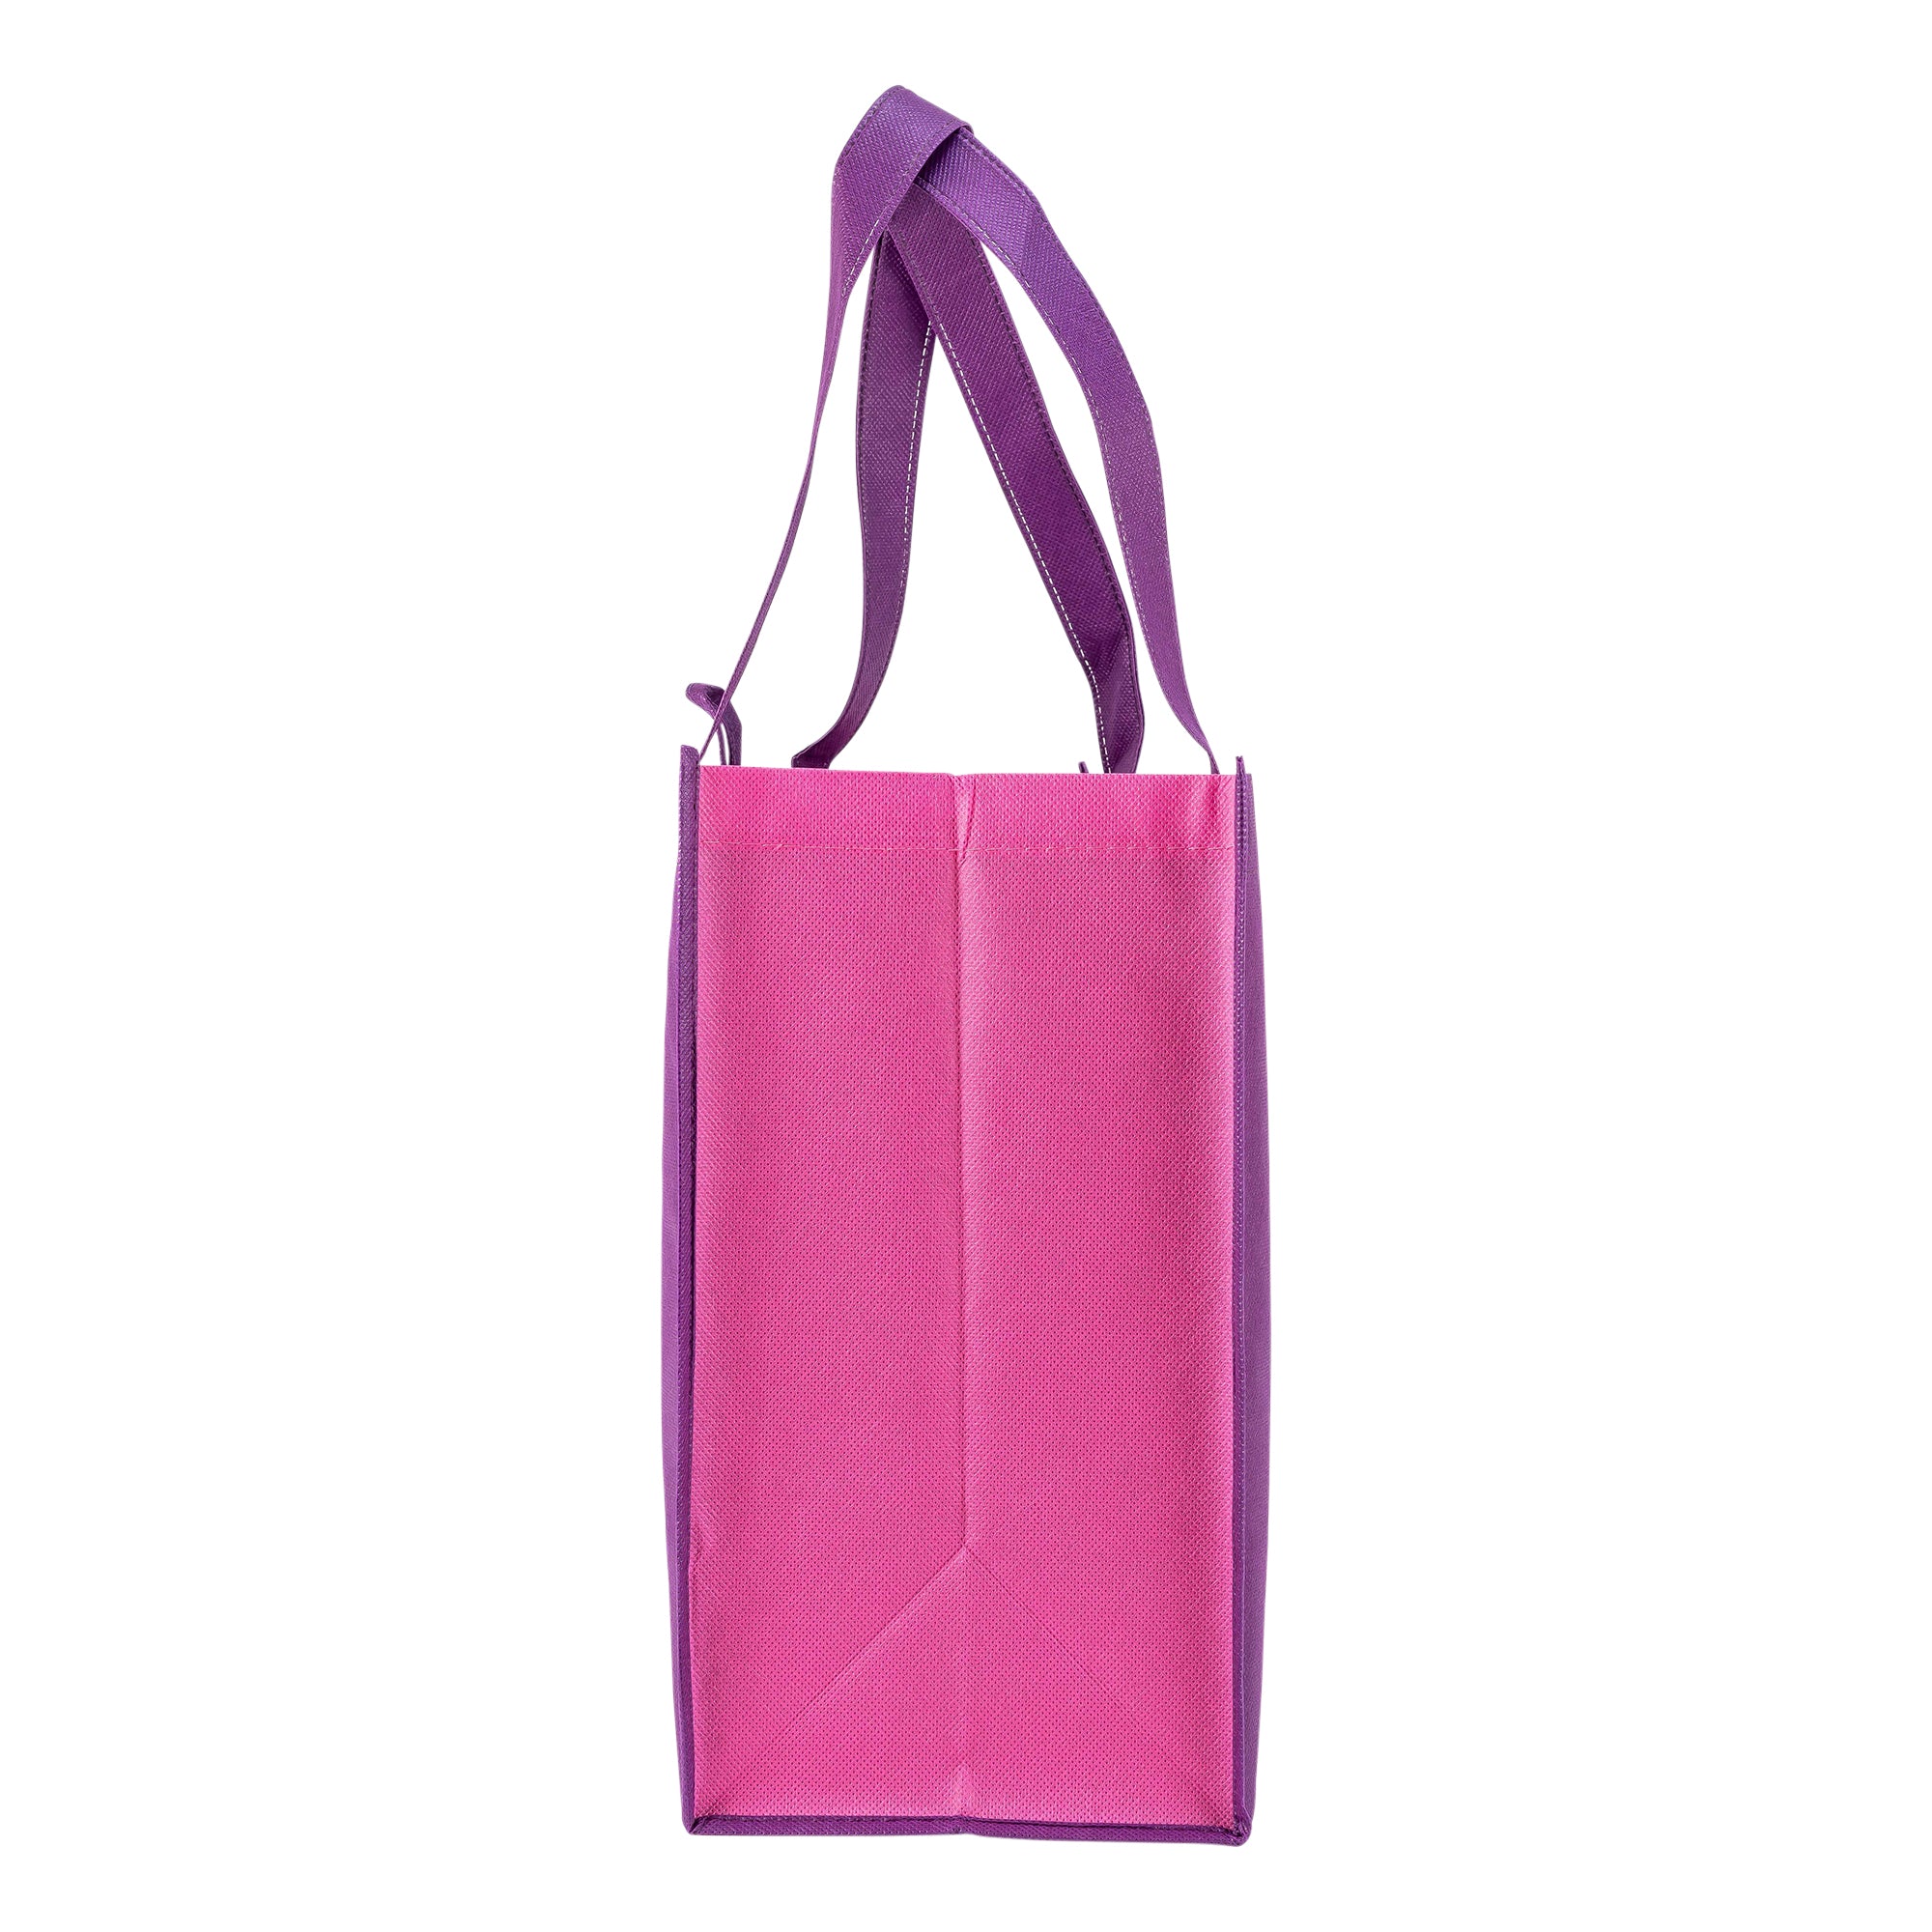 Eco Tote: Purple: Greatest Of These Is Love